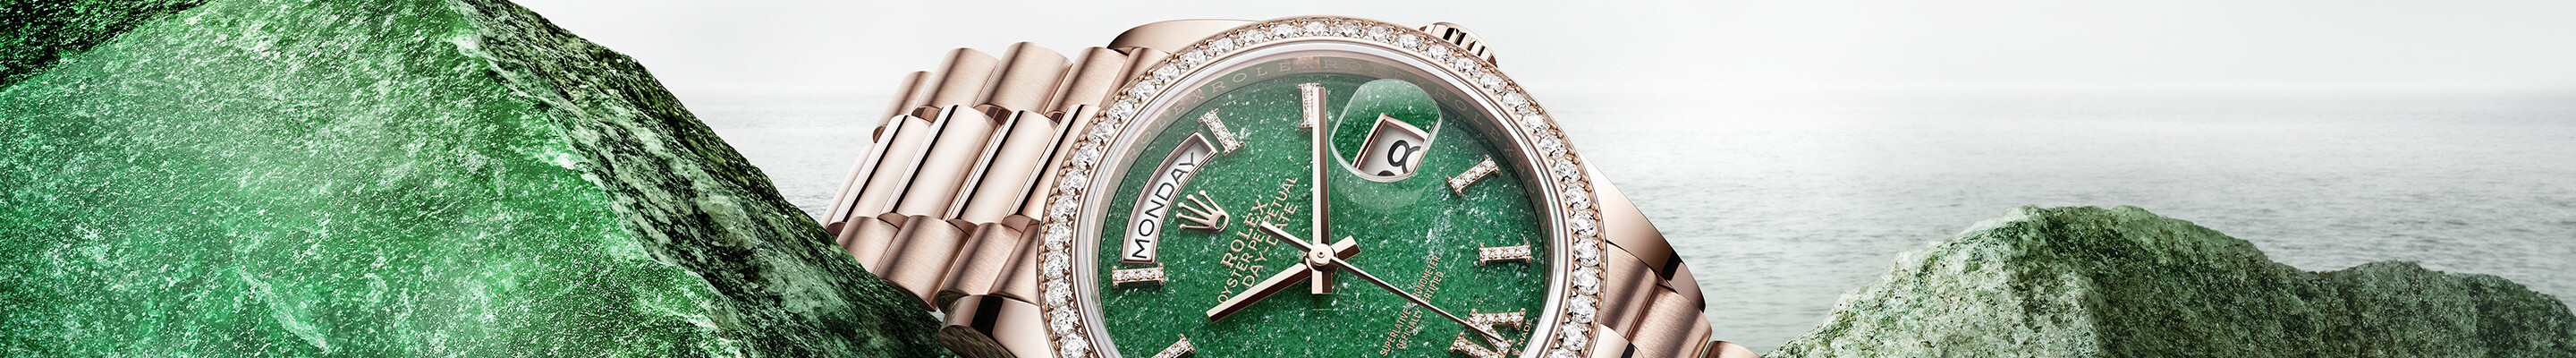 ROLEX DAY-DATE chez Frayssinet Joaillier